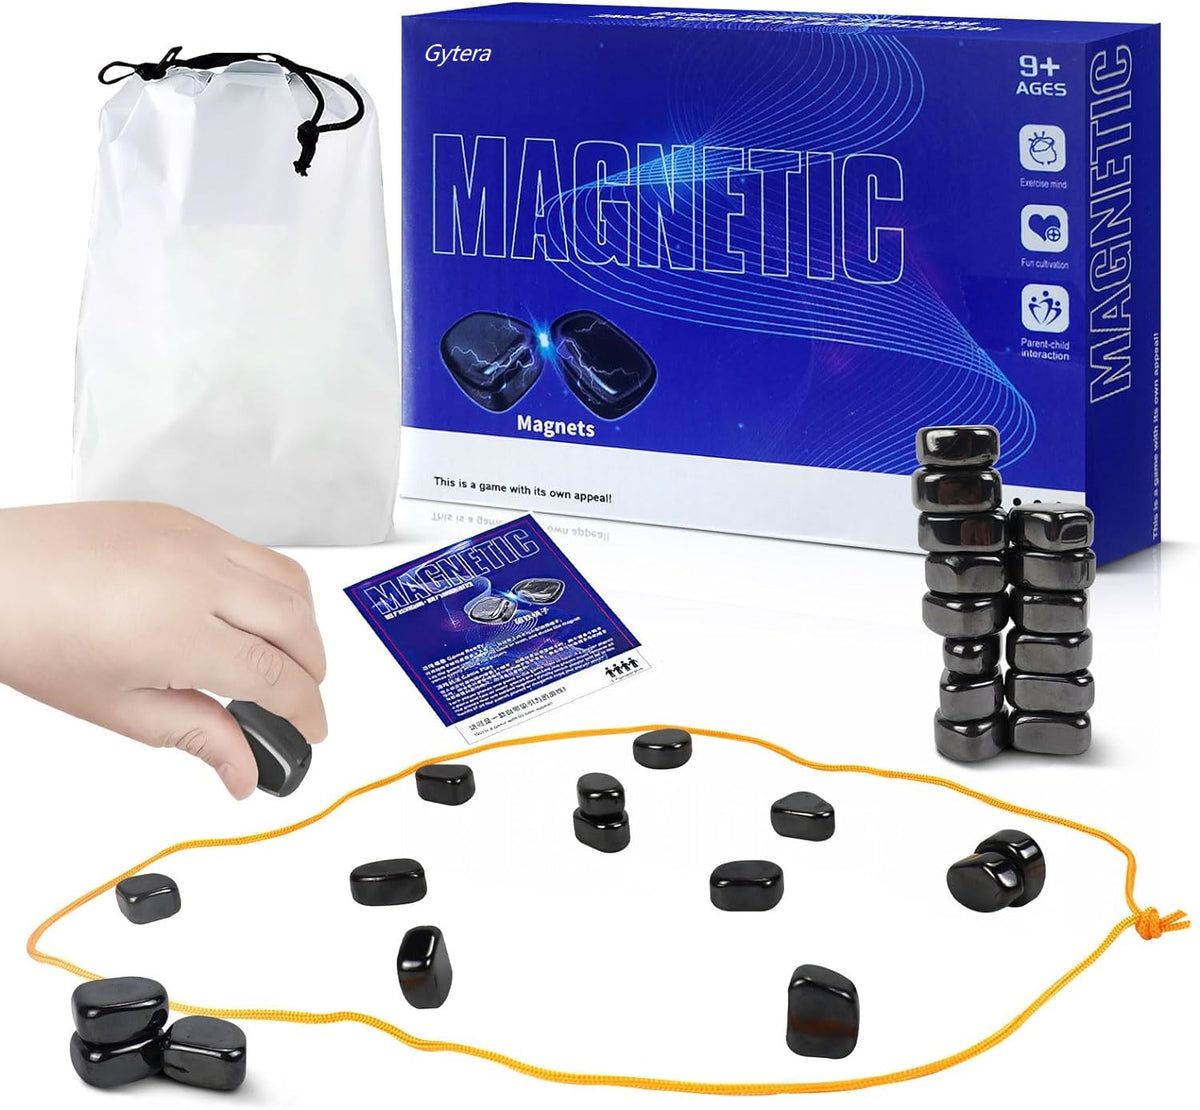 Magnetic Chess Game Stones, Magnetic Effect Chess Set Battle Chess Board, Fun Table Top Magnet Game, Educational Checkers Board Game